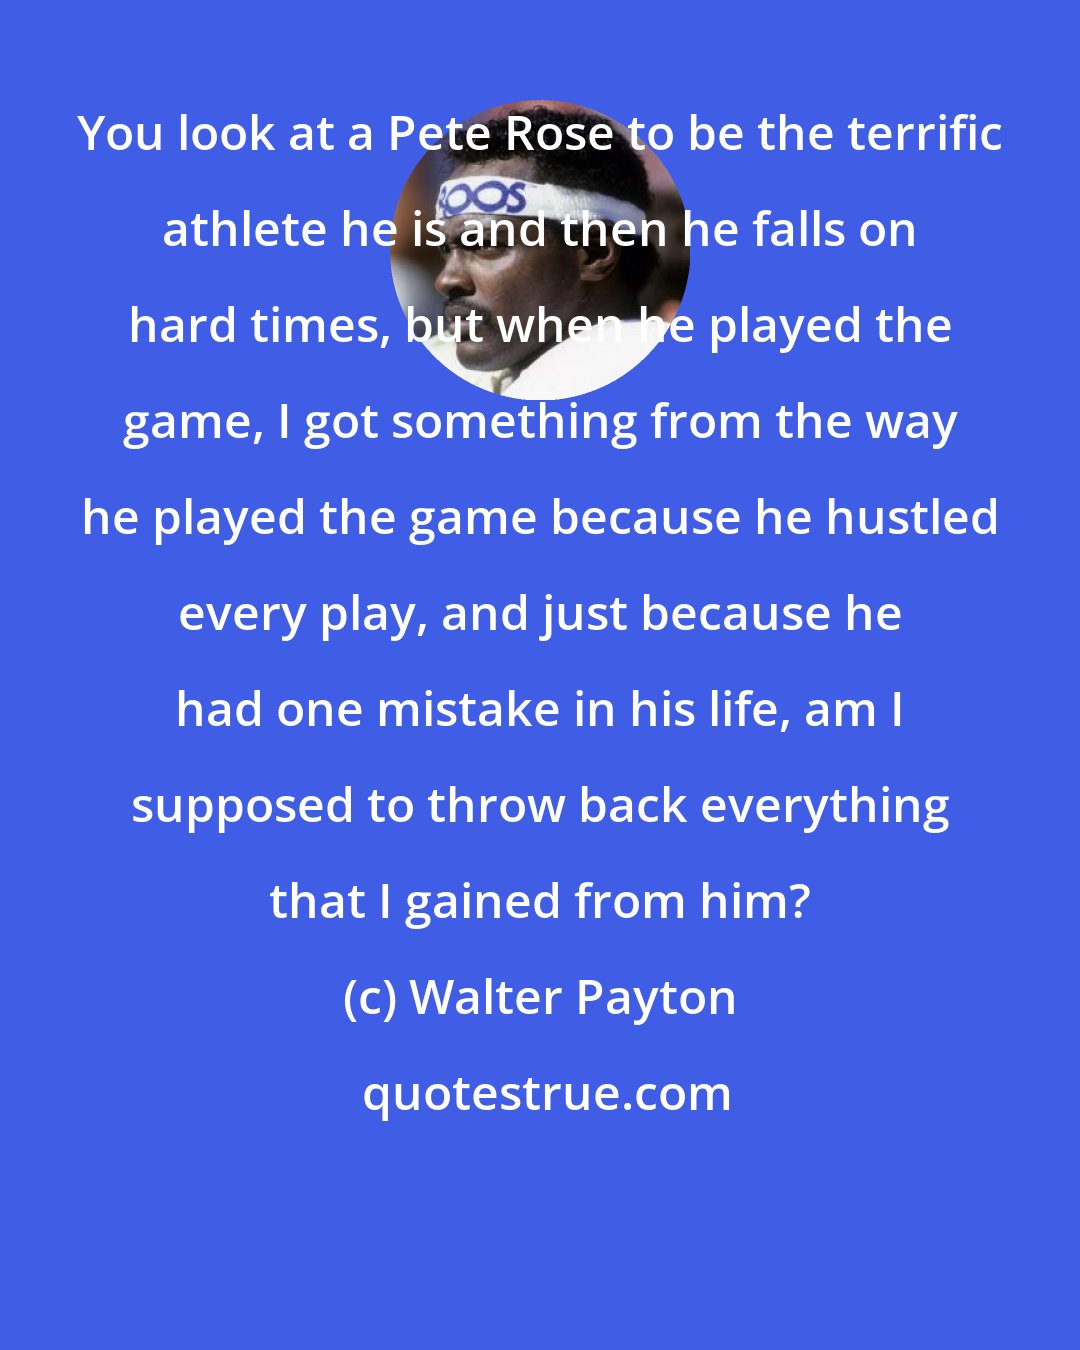 Walter Payton: You look at a Pete Rose to be the terrific athlete he is and then he falls on hard times, but when he played the game, I got something from the way he played the game because he hustled every play, and just because he had one mistake in his life, am I supposed to throw back everything that I gained from him?